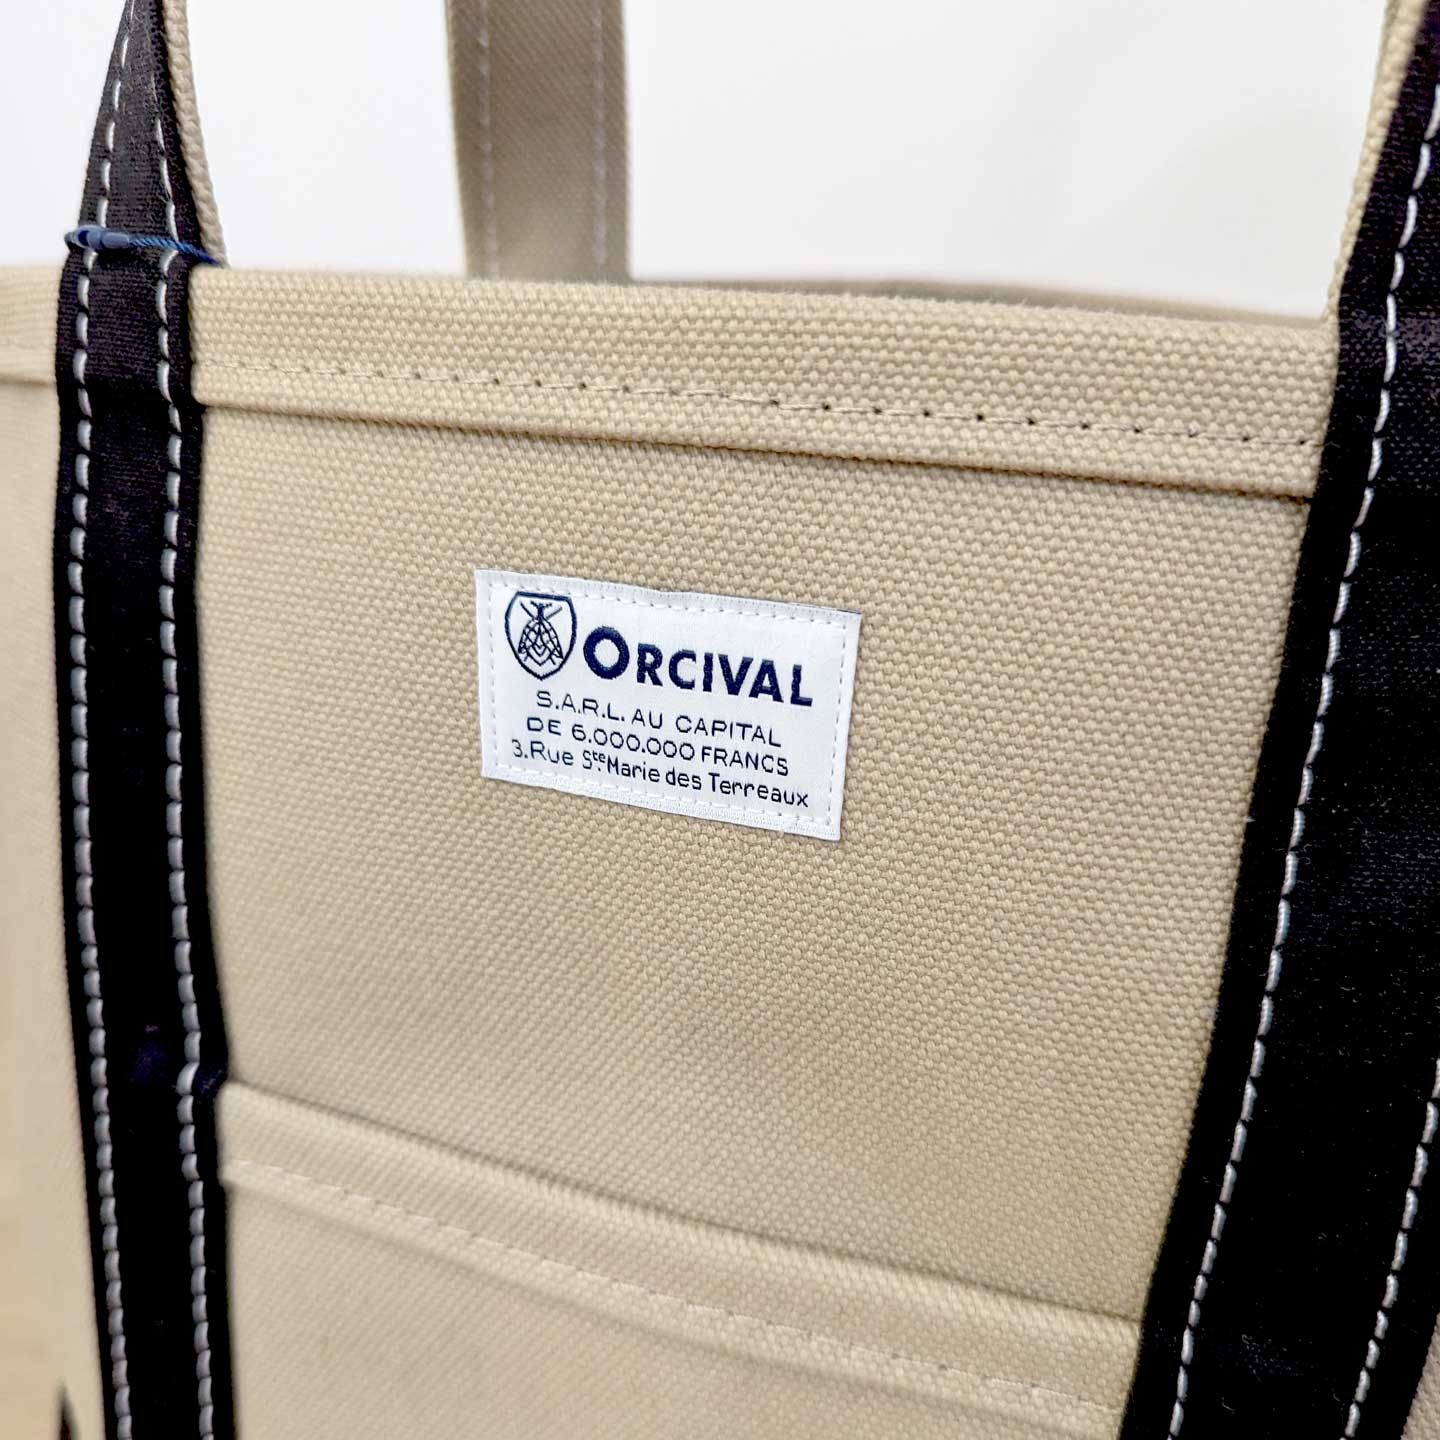 The Khaki Black tote-bag by Orcival in medium size